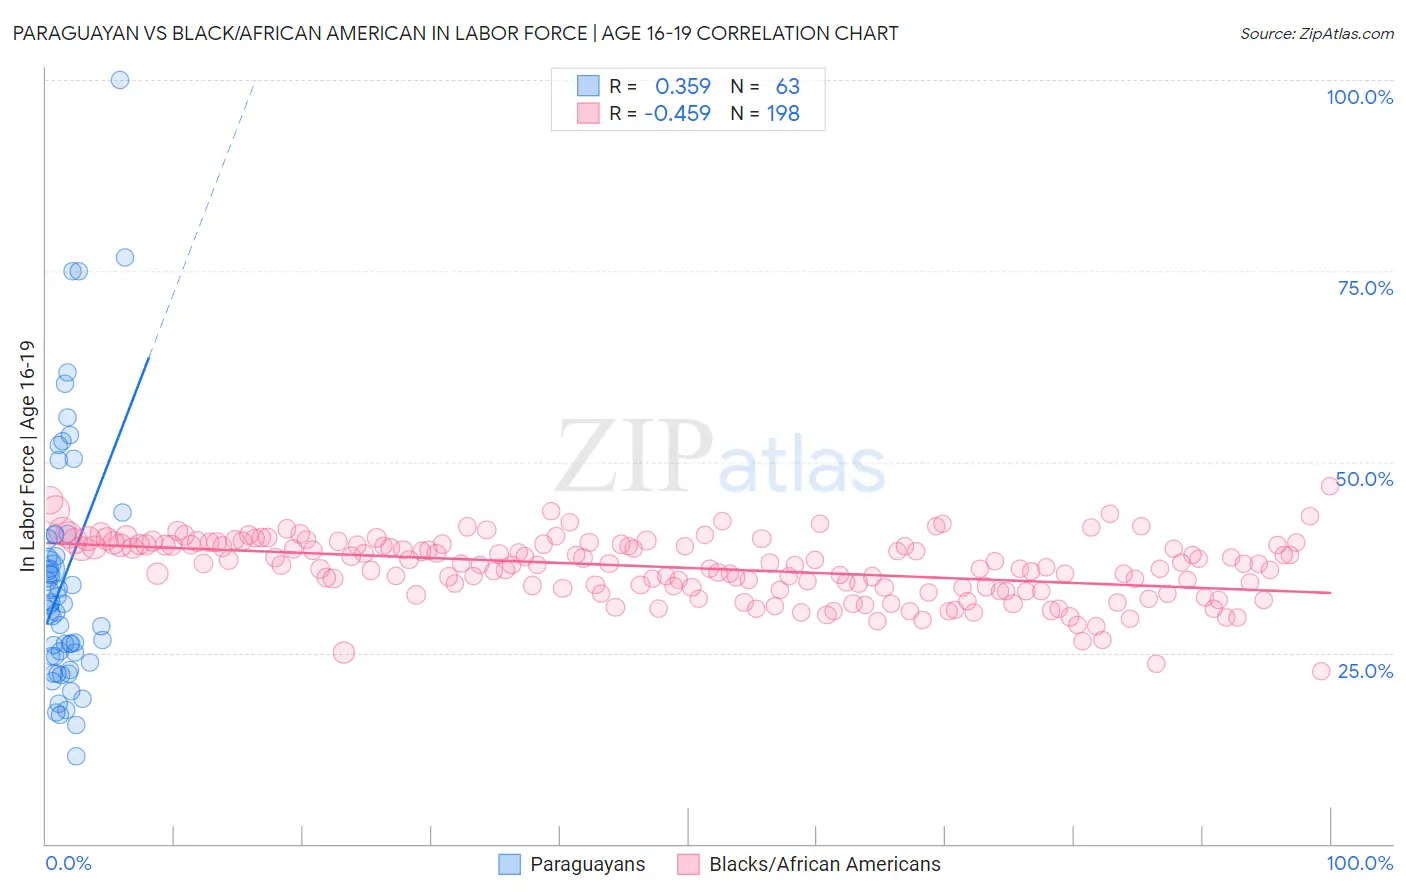 Paraguayan vs Black/African American In Labor Force | Age 16-19